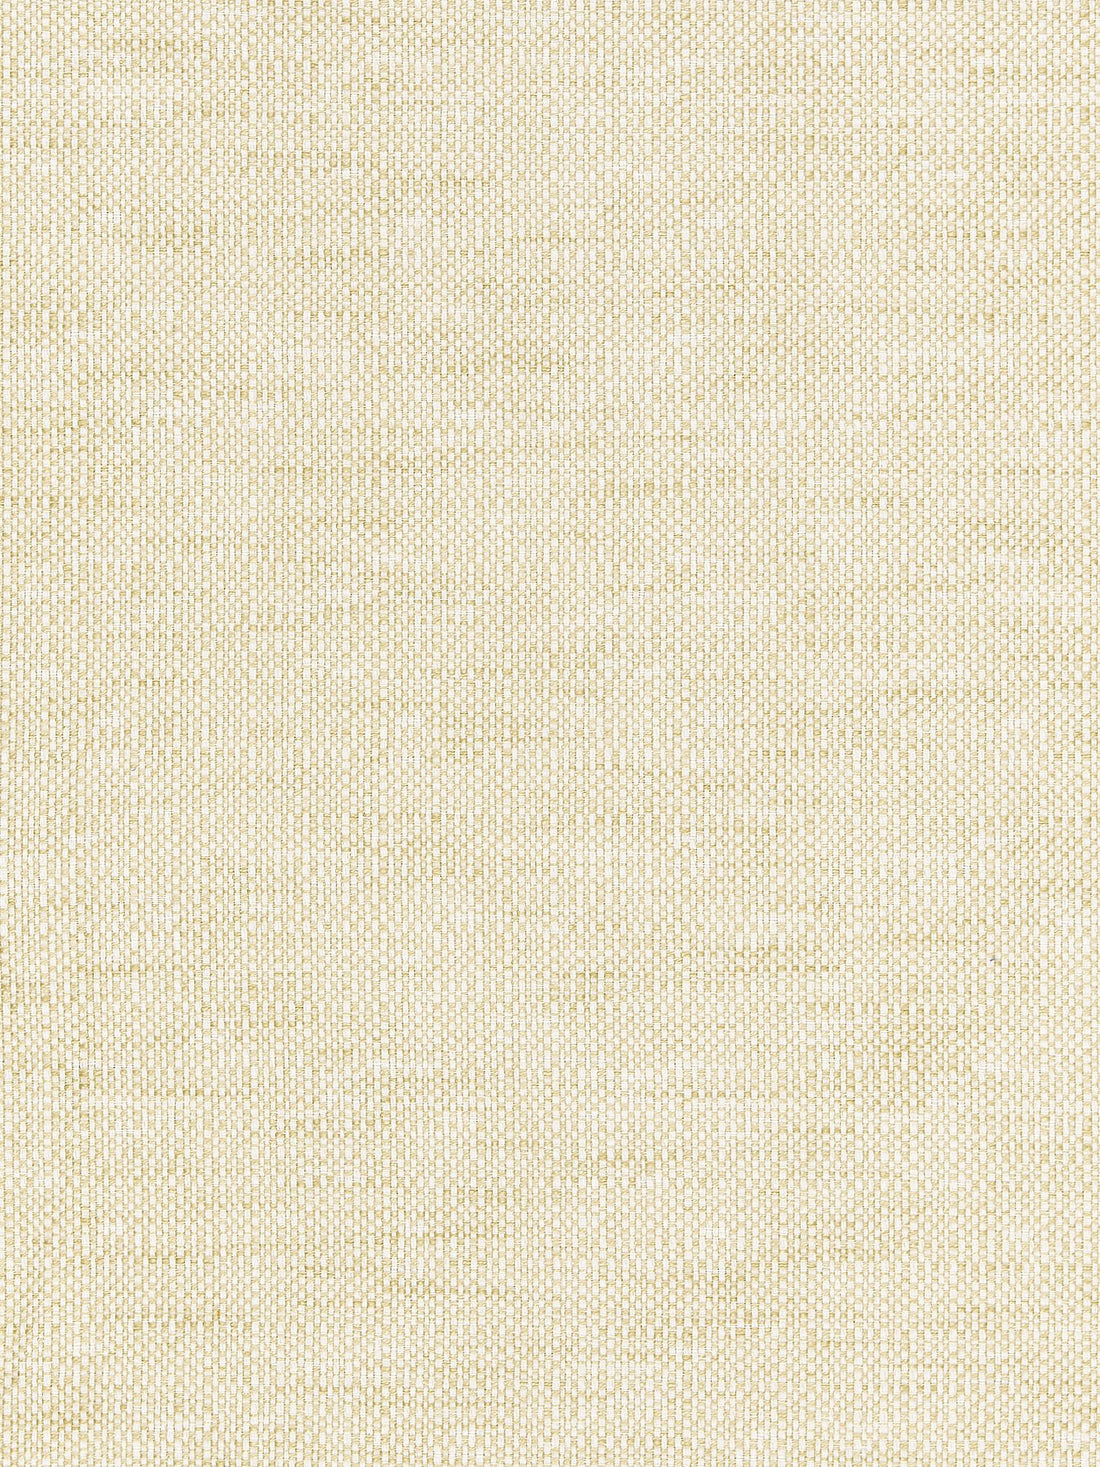 Chester Weave fabric in sahara color - pattern number BK 0002K65118 - by Scalamandre in the Old World Weavers collection